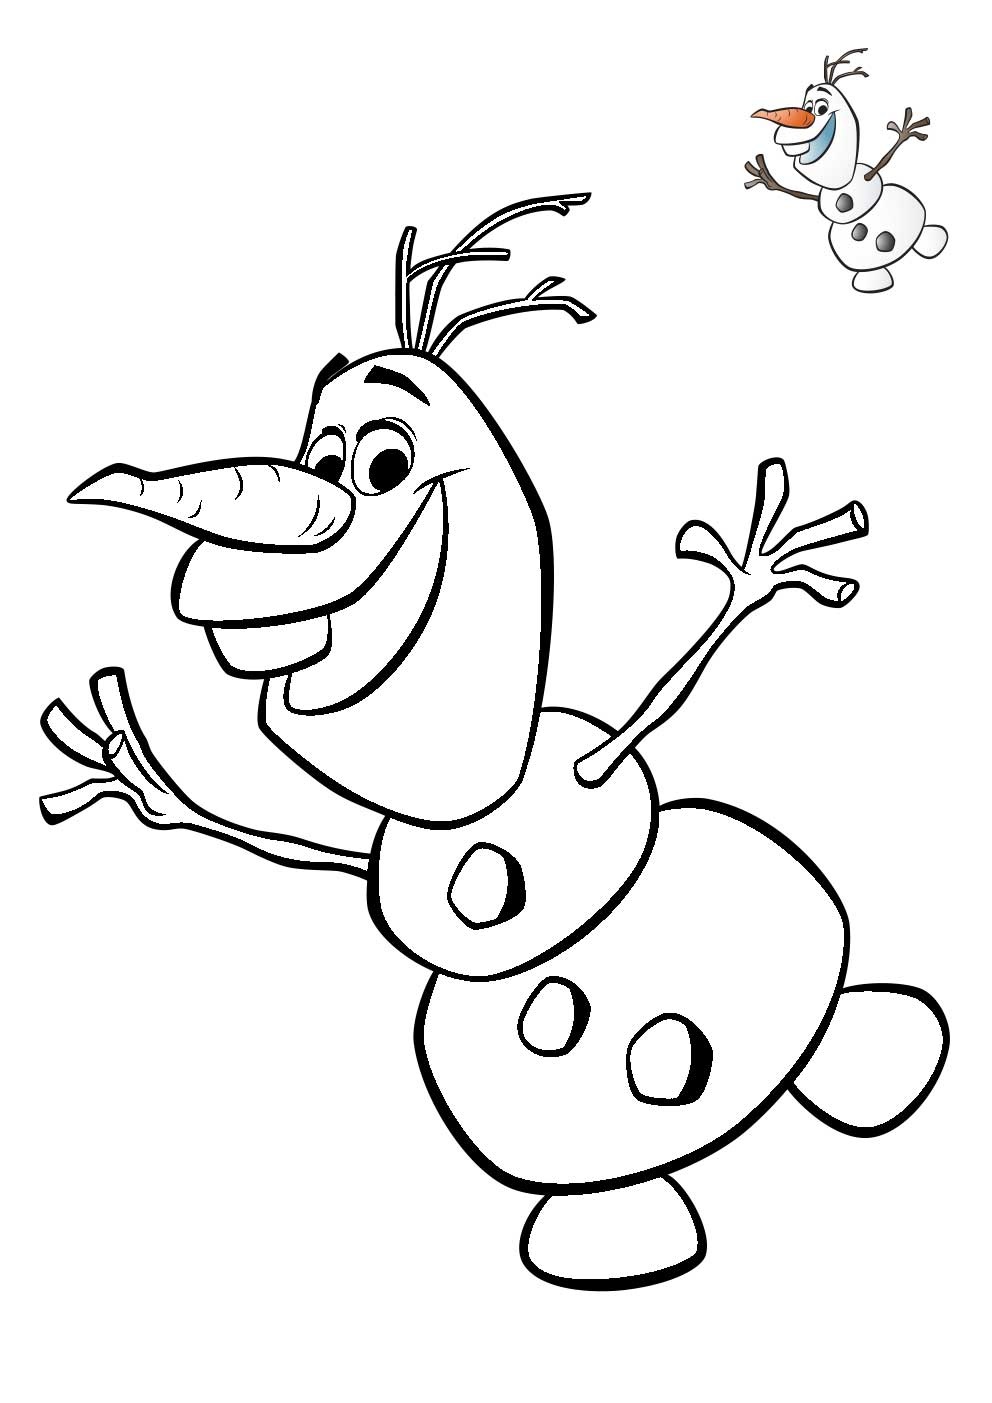 Olaf Funny Frozen 2018 Coloring Page